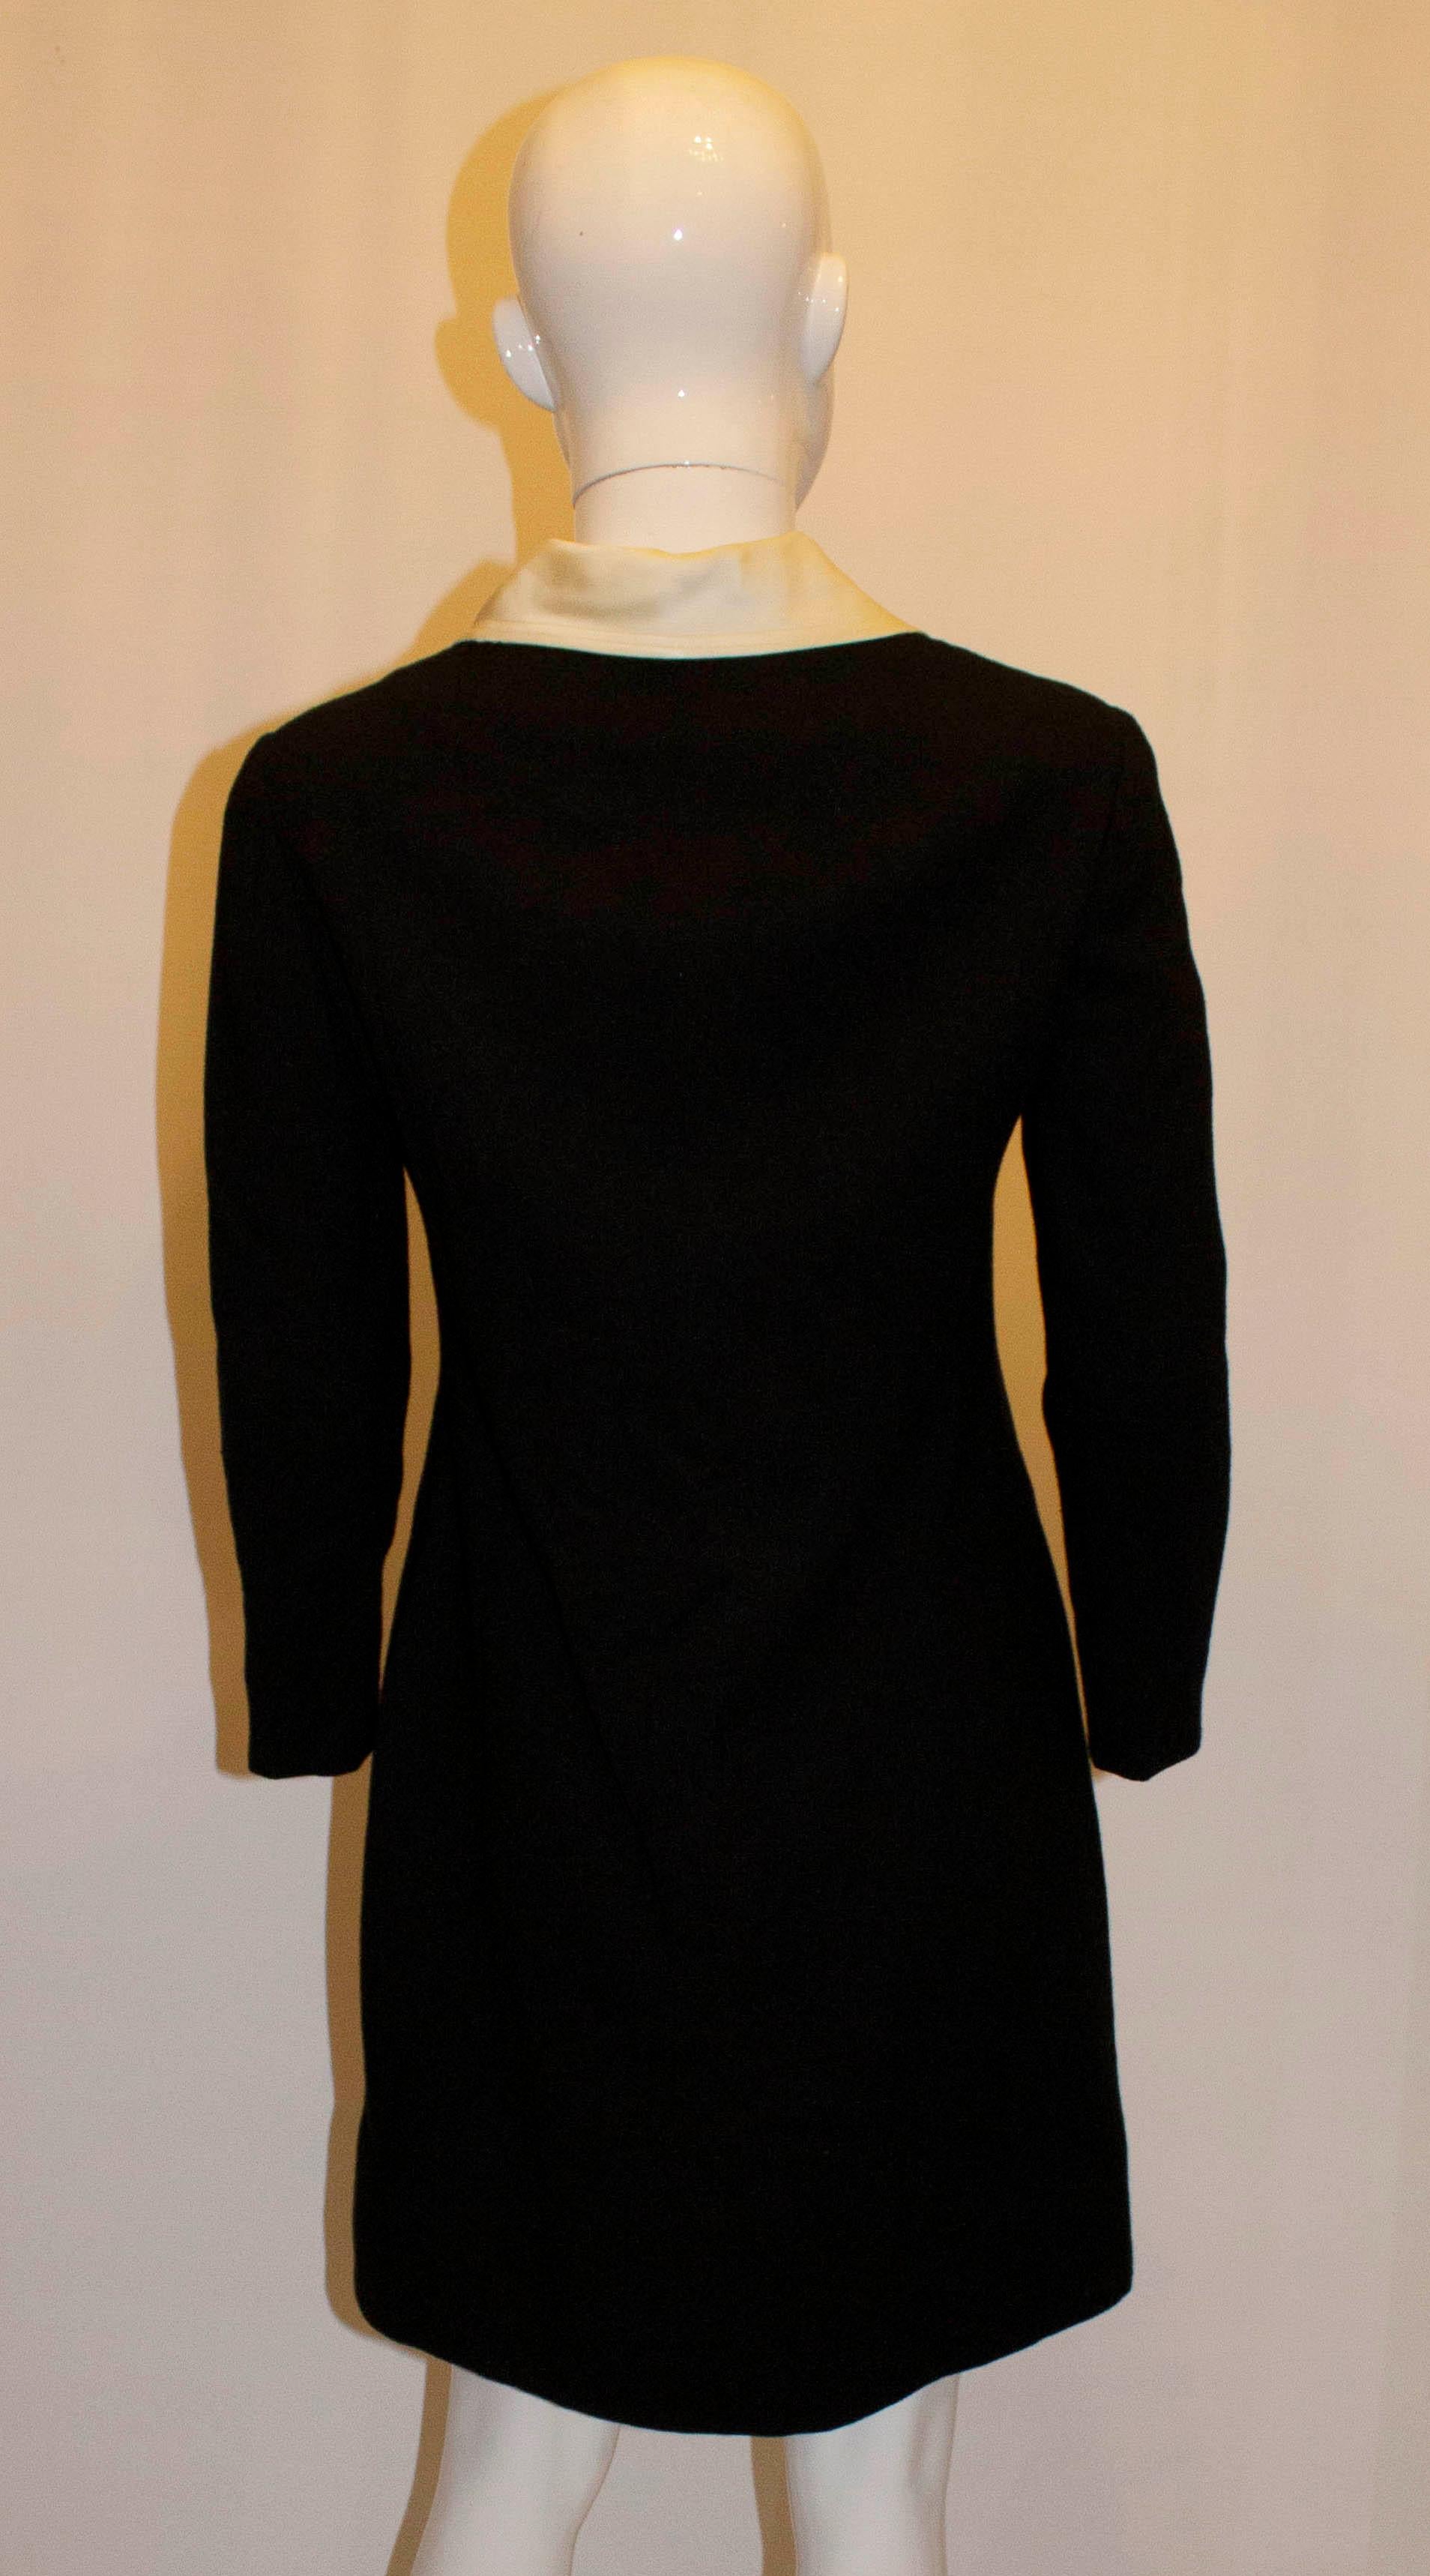 A chic and head turning dress by Oscar de la Renta with a wonderful diamante zip. The dress is in a black wool crepe with white satin collar and front pockets.  The dress is fully lined.
Measurements: Bust up tto 36'',length 35''